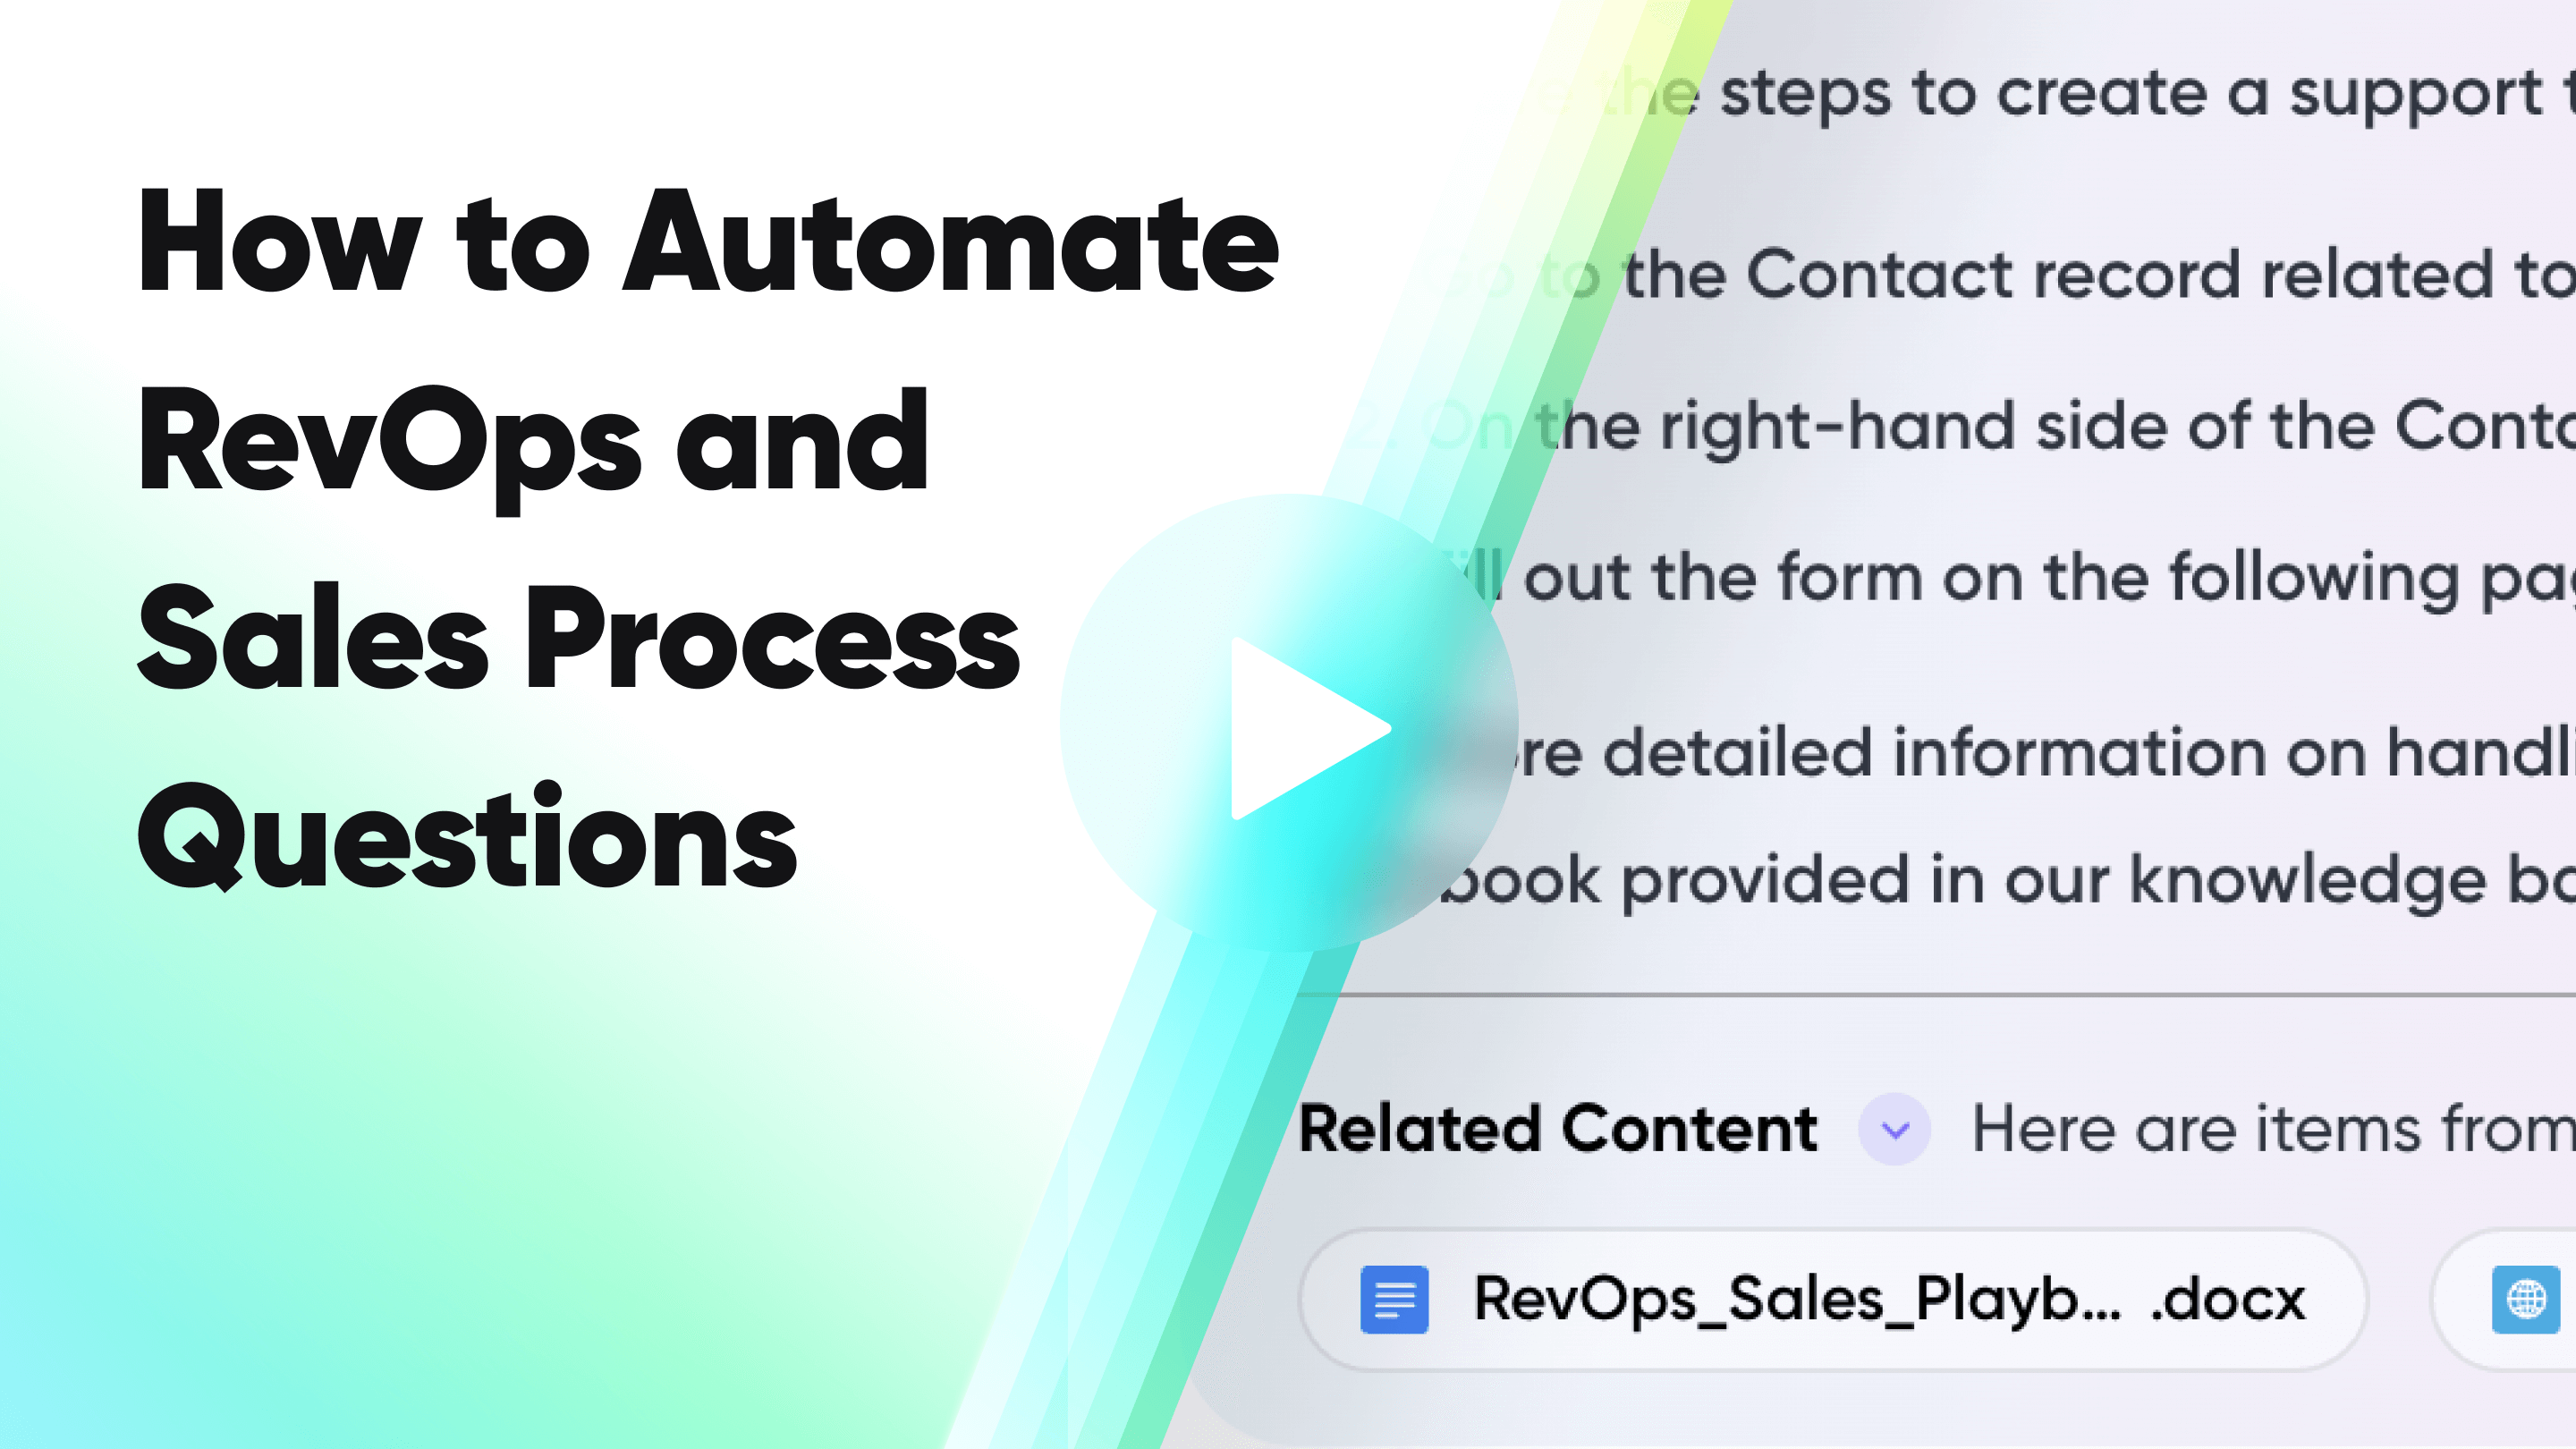 Automating RevOps Sales Process Questions with AI